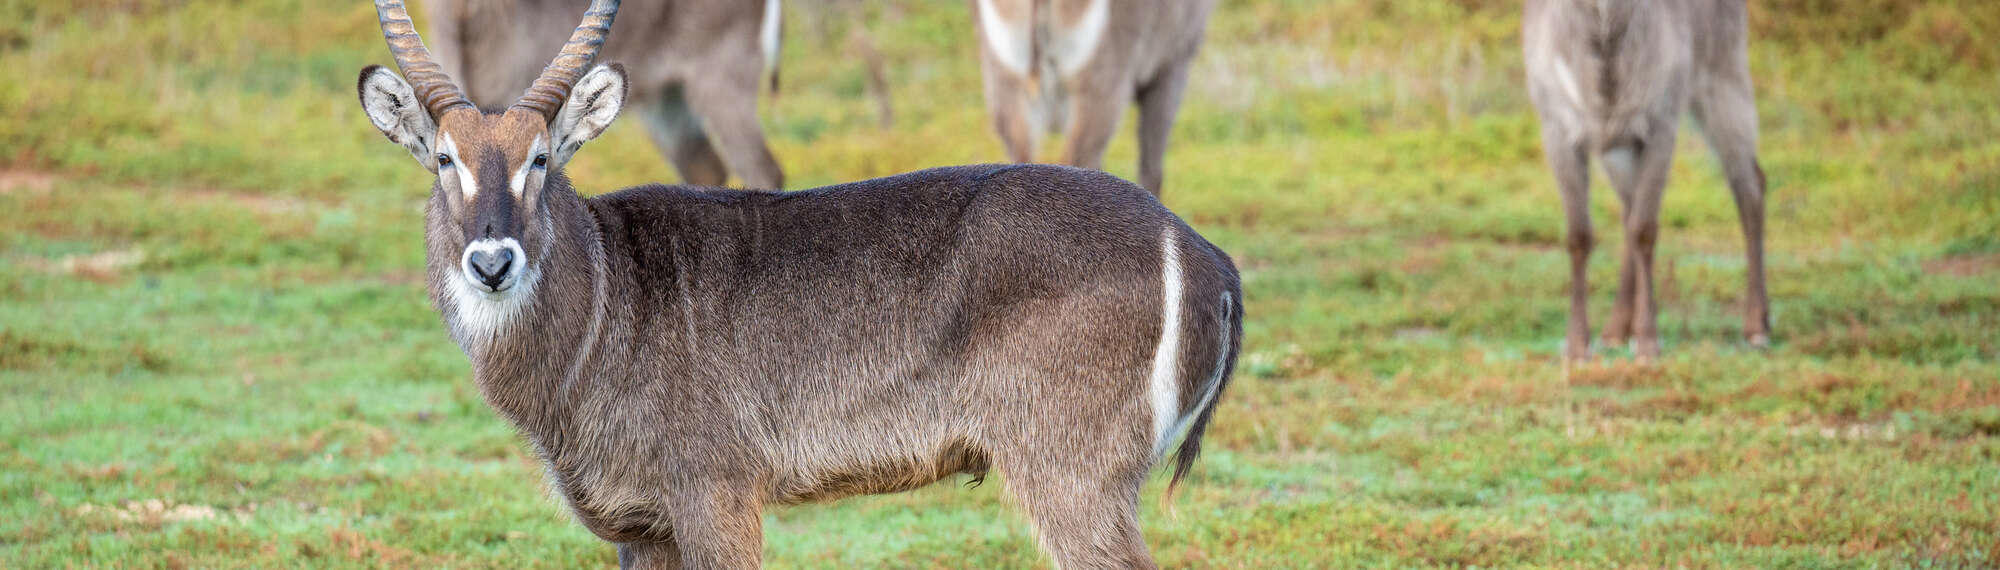 Male waterbuck looking at camera, females in background.